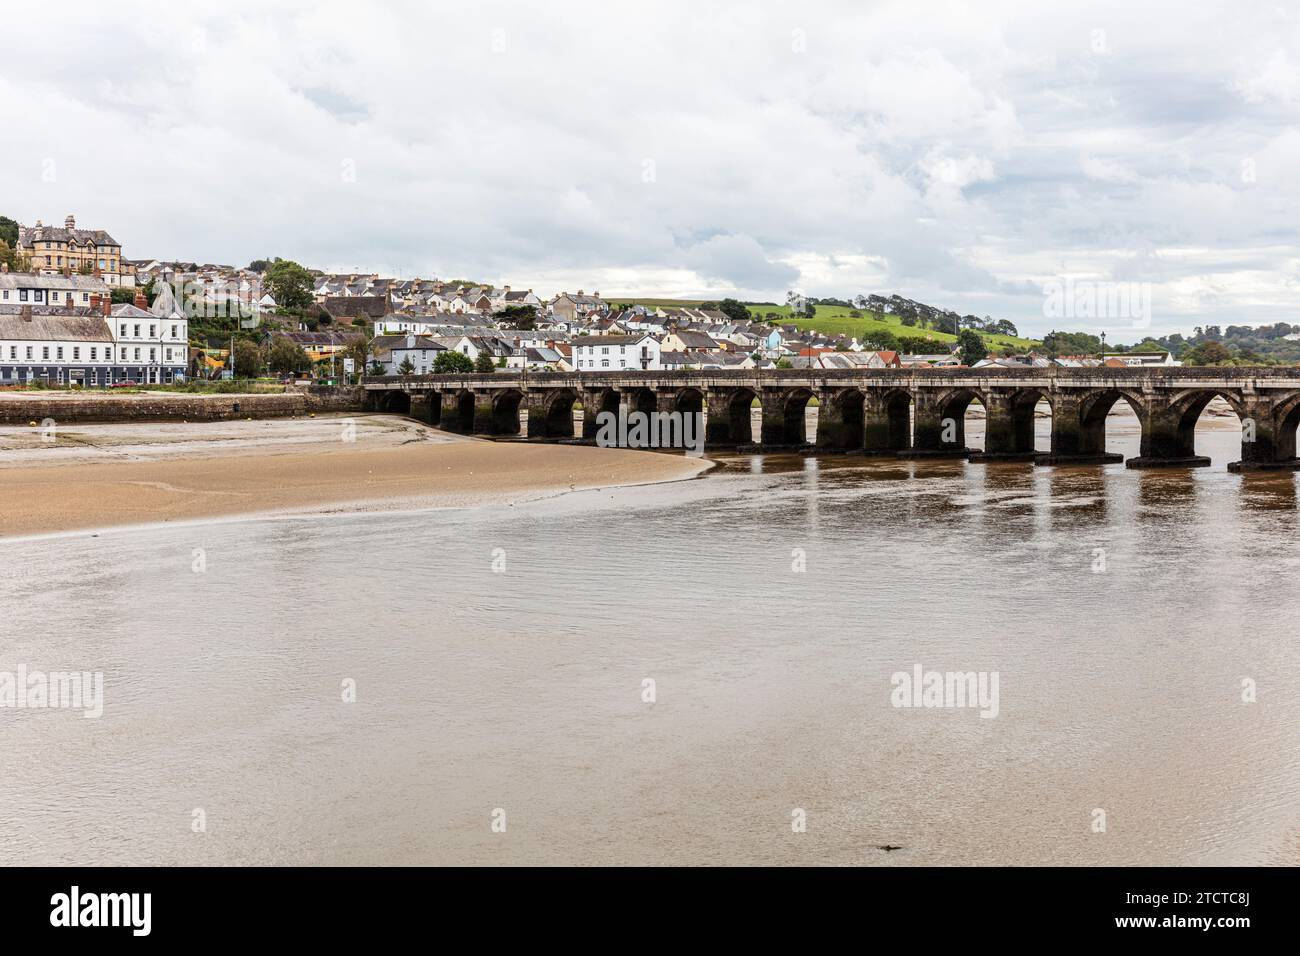 Bideford Long Bridge in North Devon spans the River Torridge near its estuary and connects the old part of the town, Bideford Town, Devon, UK, England Stock Photo